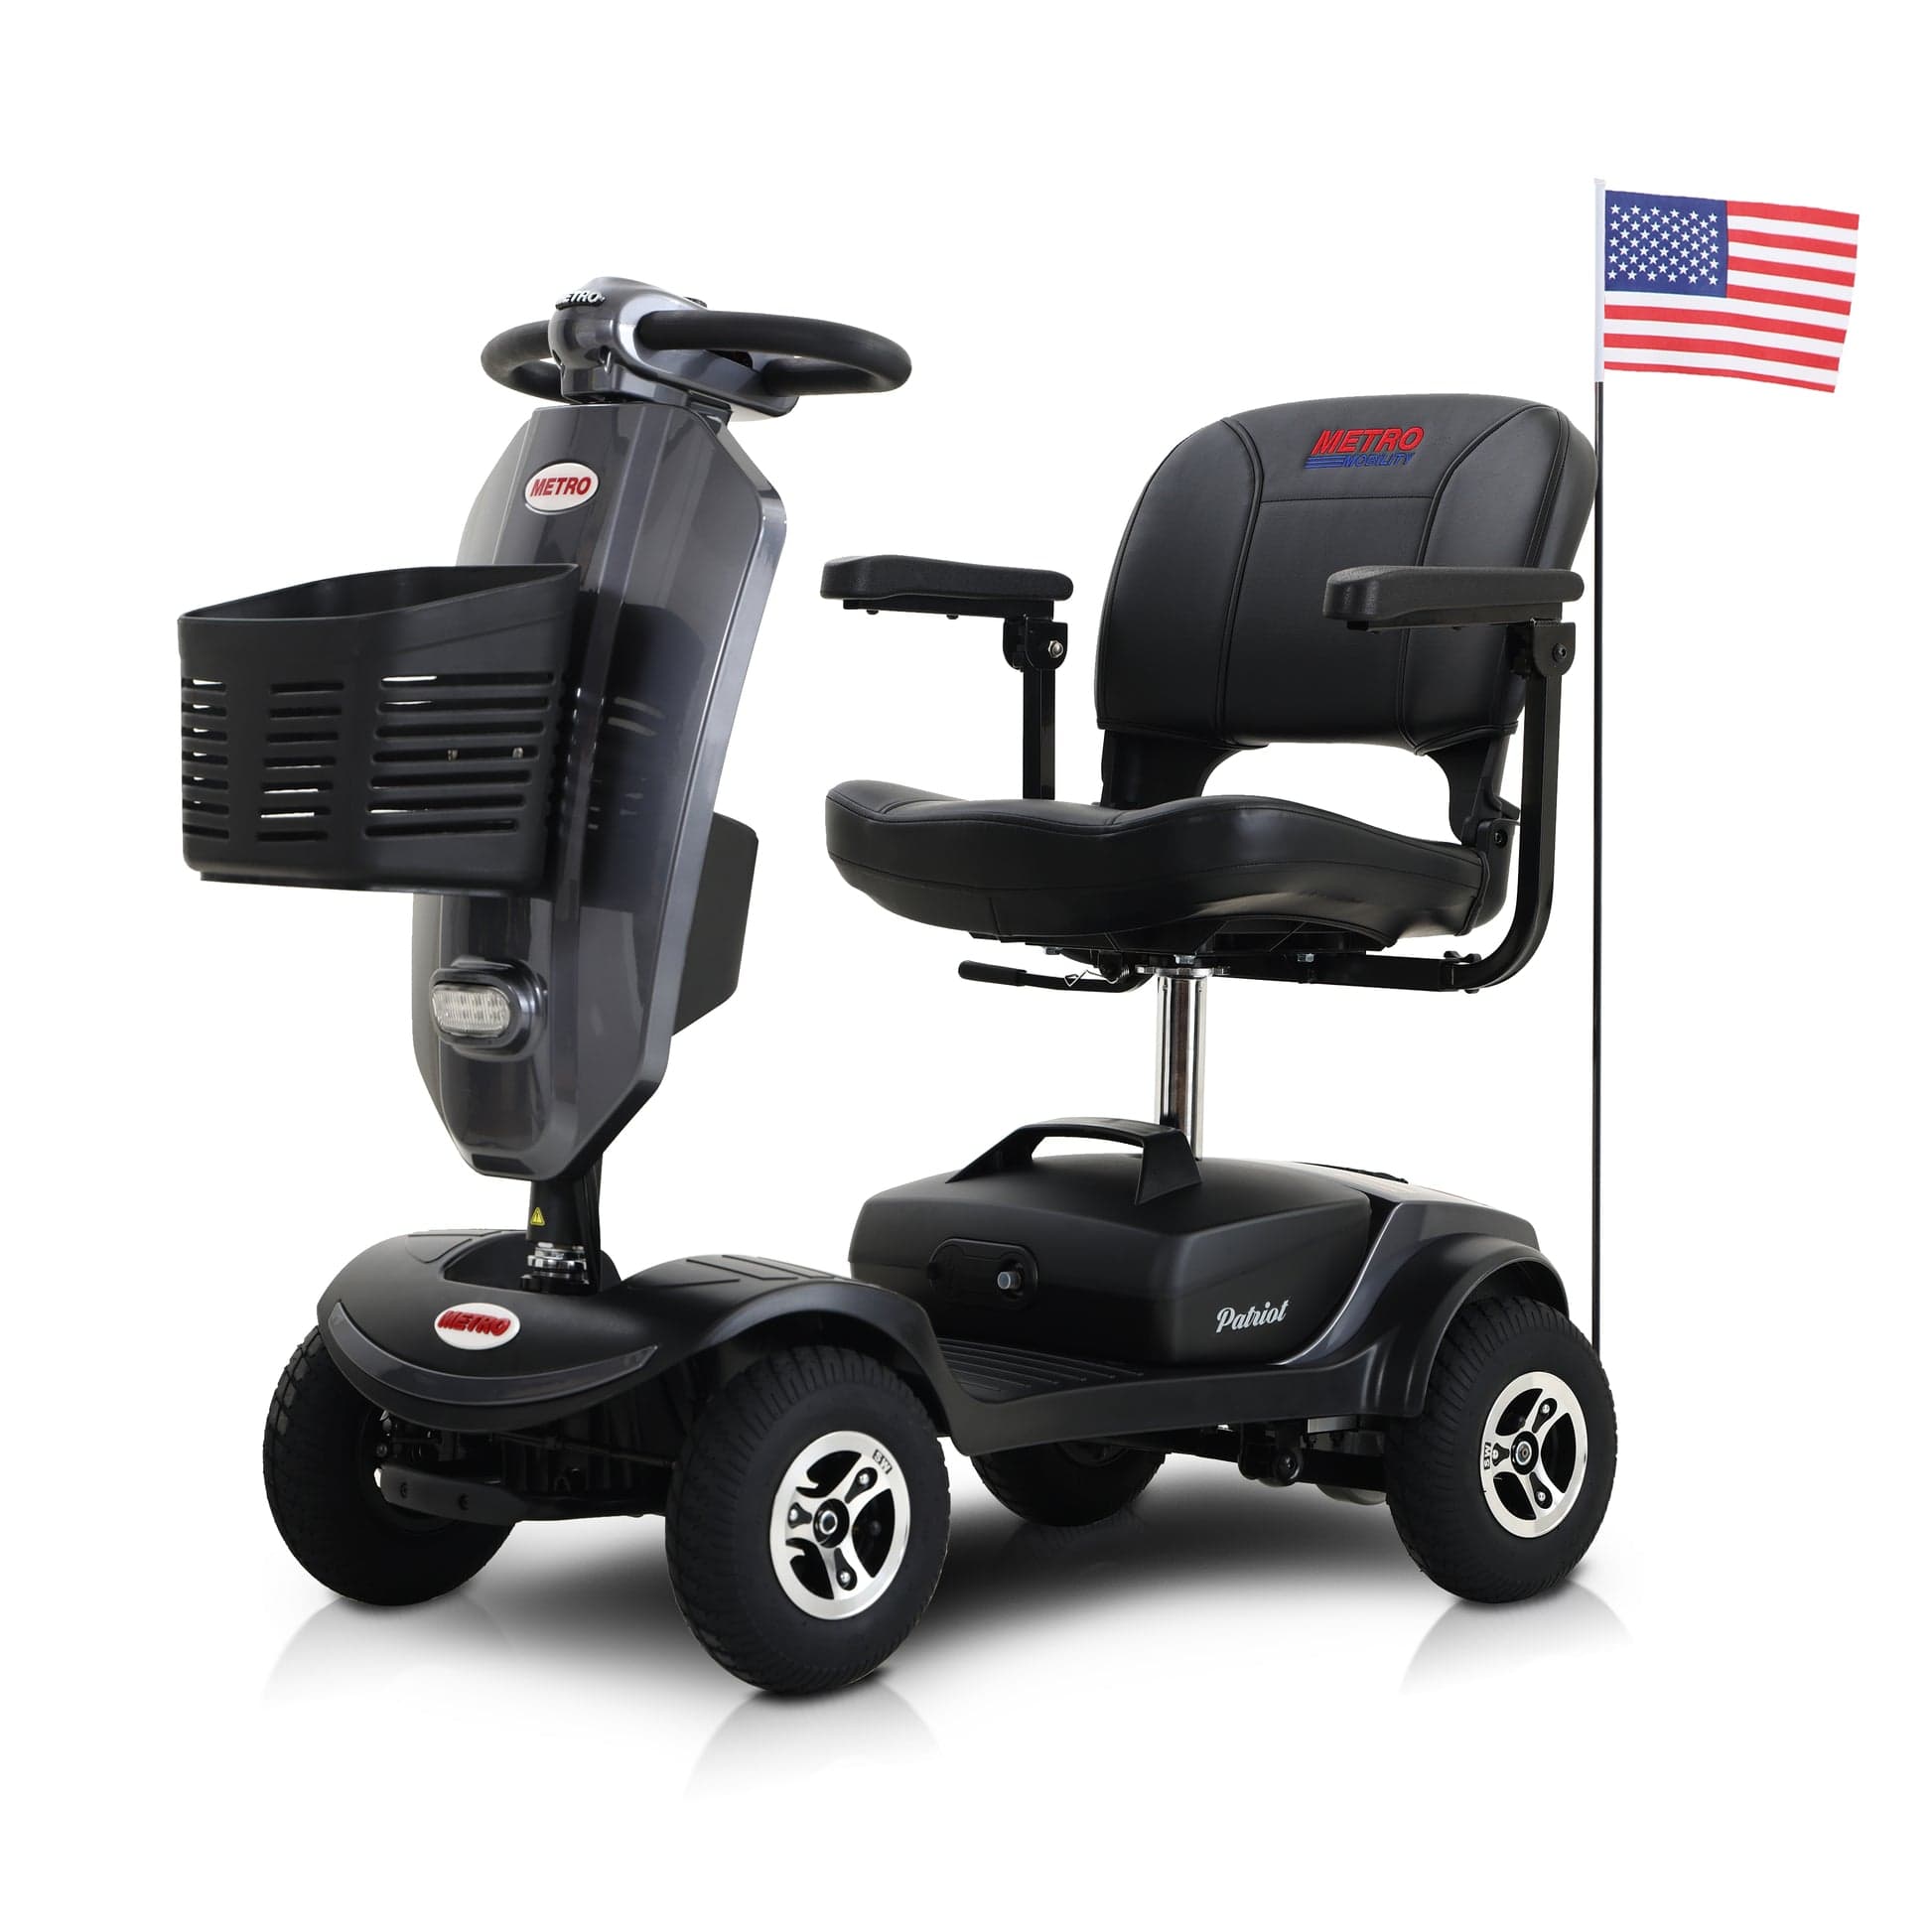 METRO MOBILITY Mobility Scooters Gray Metro Mobility - Patriot 4-Wheel Mobility Scooter (Non Medical Use Only)- M1PLUSR